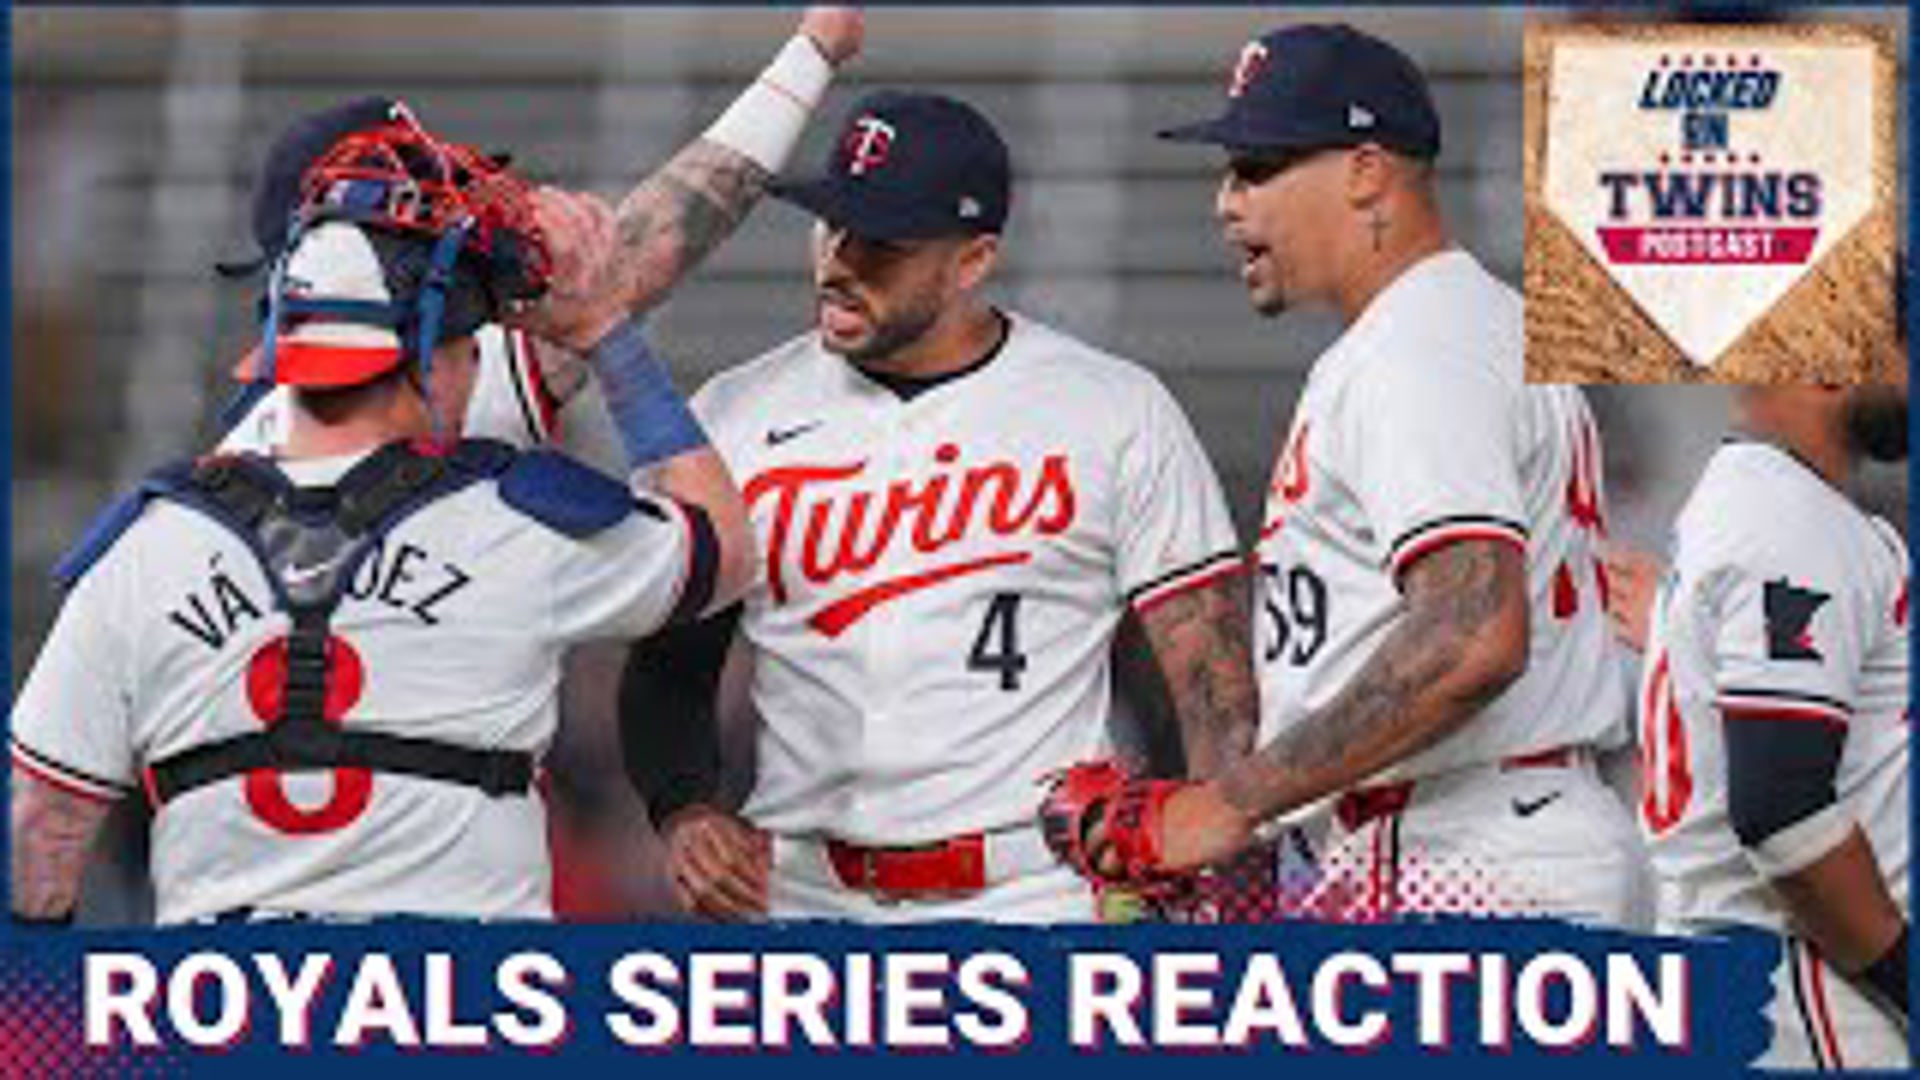 The Minnesota Twins look to make it three in a row tonight against the Kansas City Royals. Join Luke Inman and Theo Tollefson for the instant reaction after the game